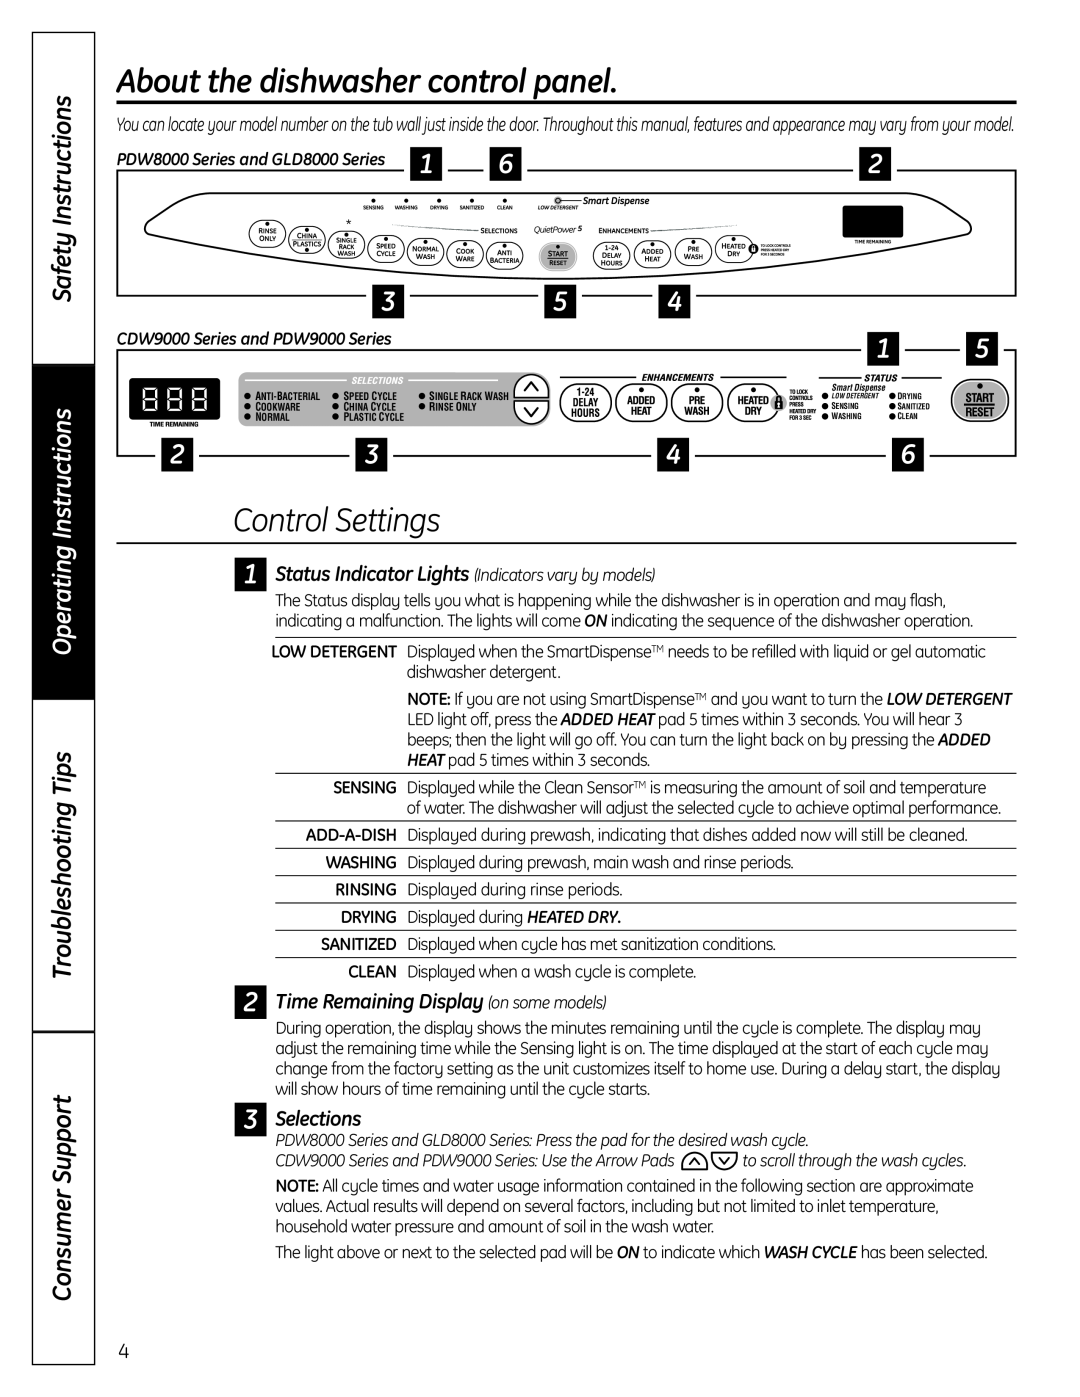 GE CDW9000 Series manual About the dishwasher control panel, Control Settings, Safety Instructions, Operating Instructions 